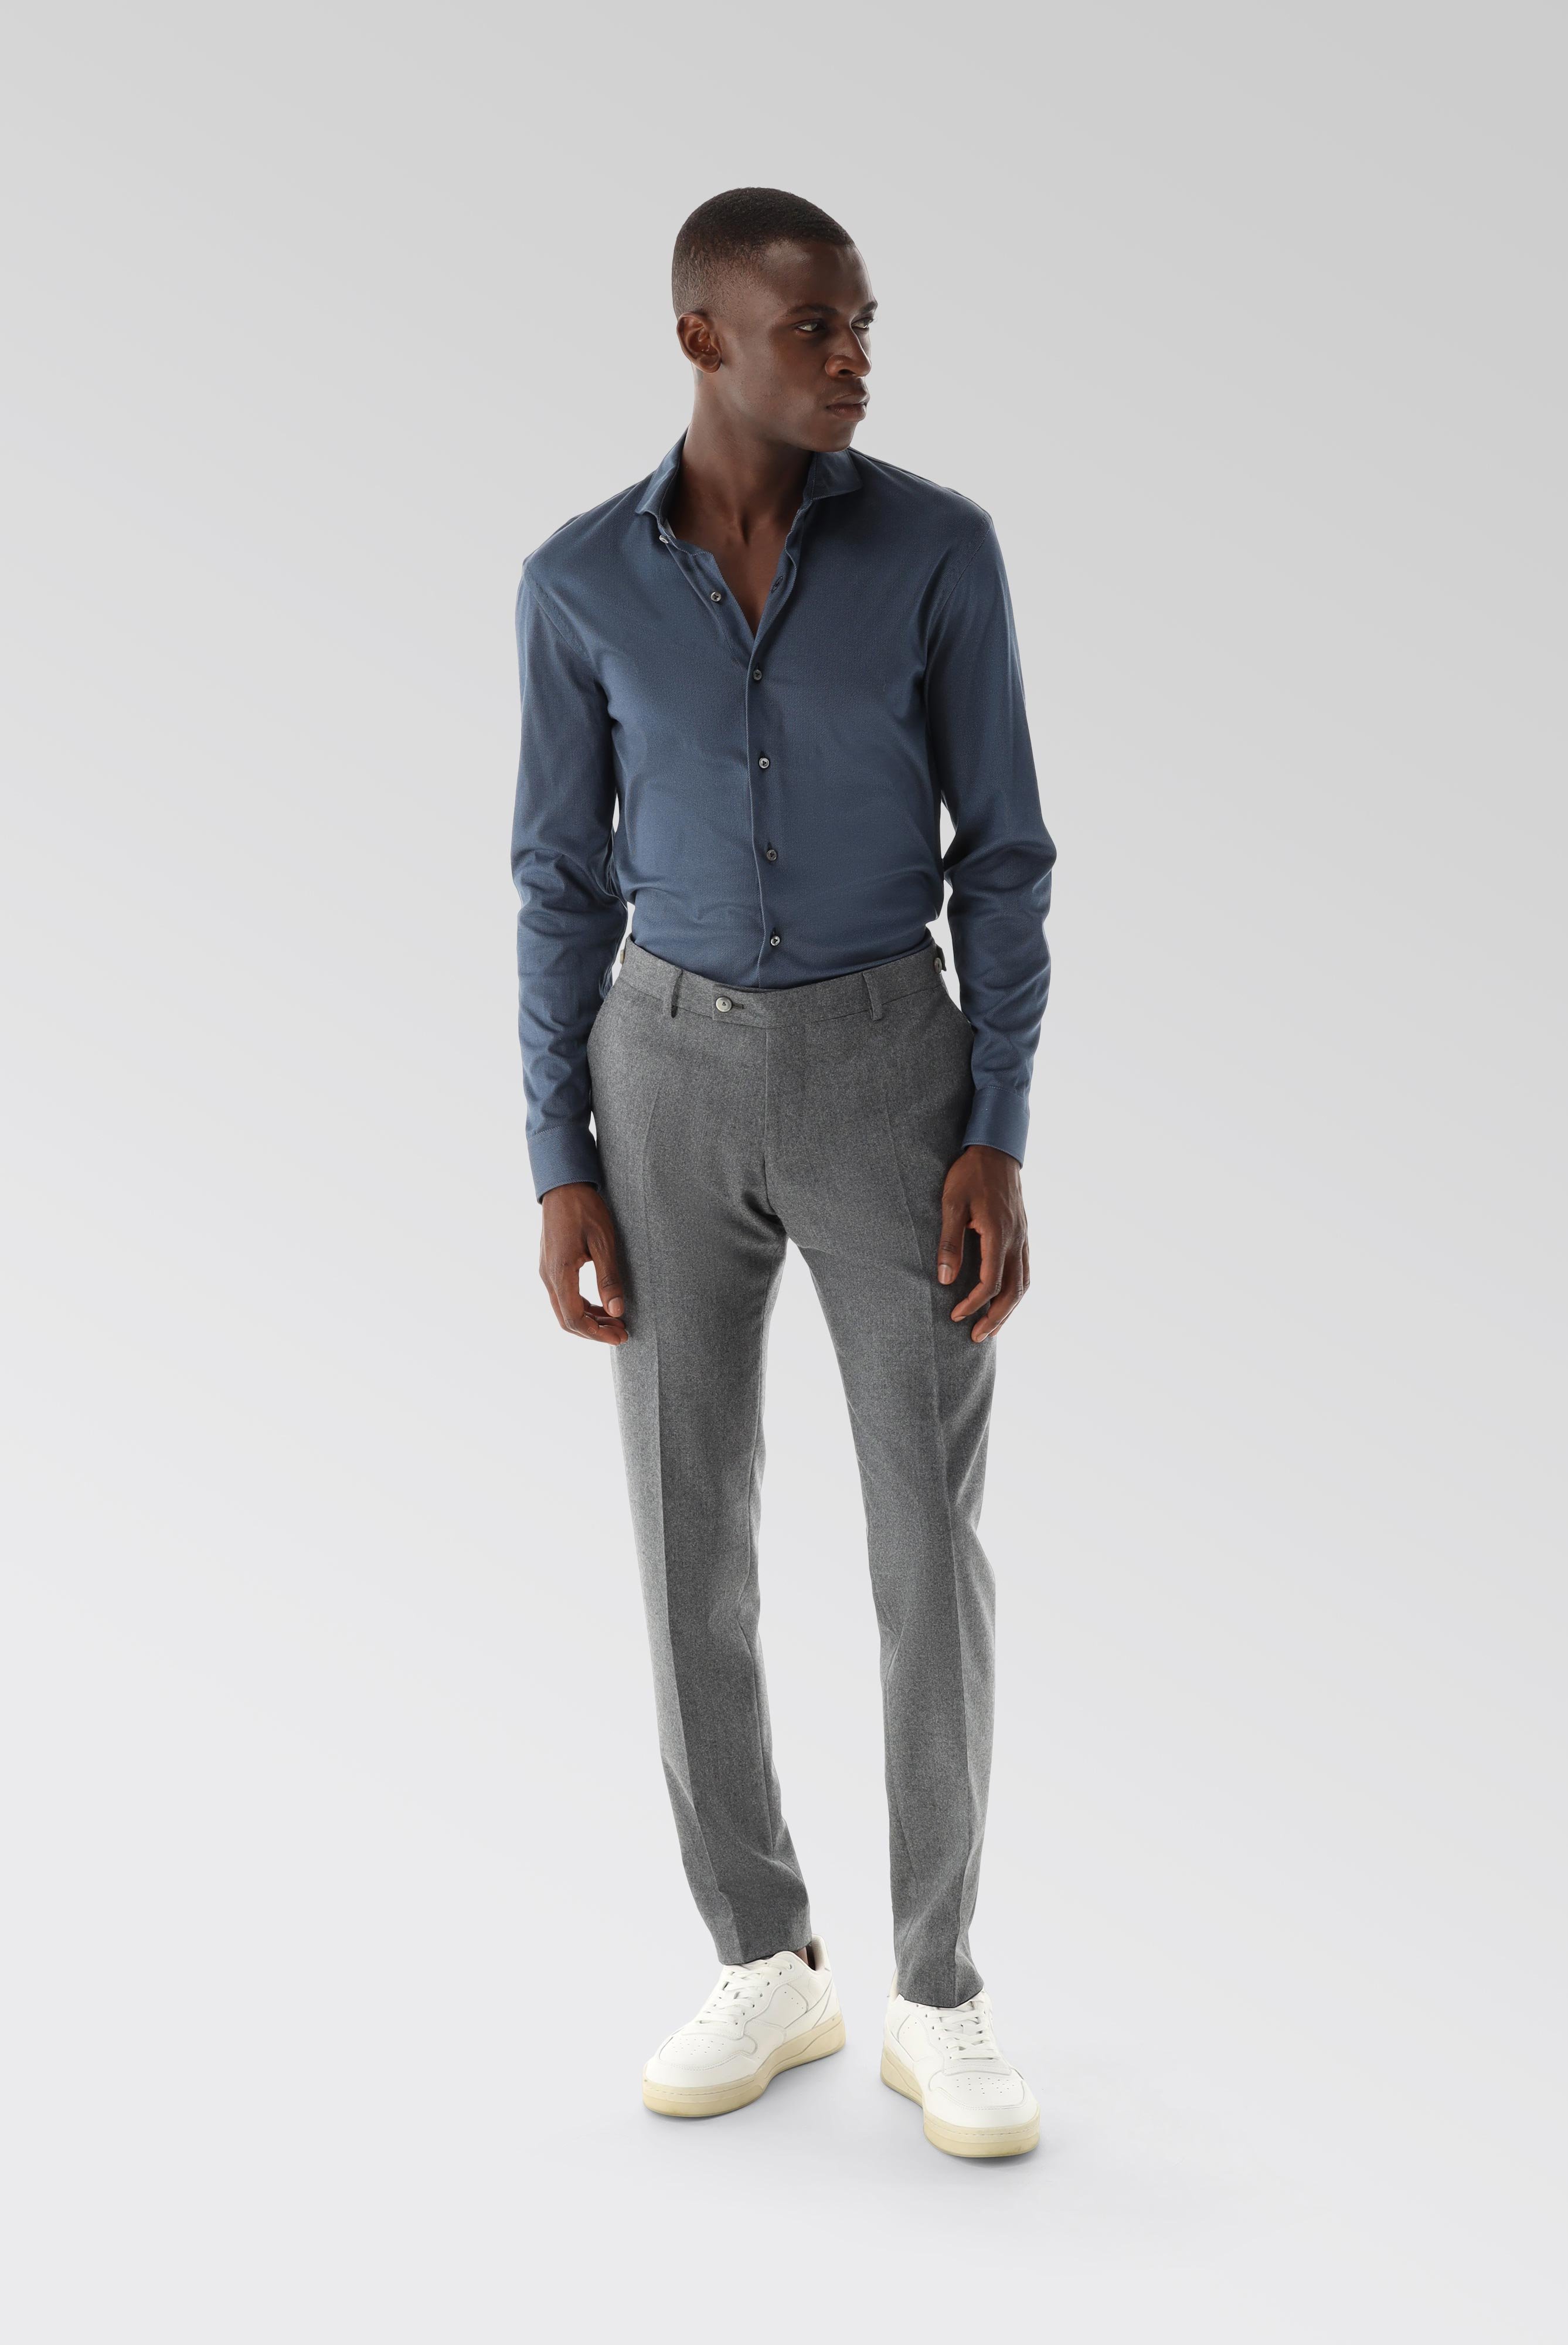 Casual Shirts+Jersey Shirt with a Twill Print Tailor Fit+20.1683.UC.187749.782.S